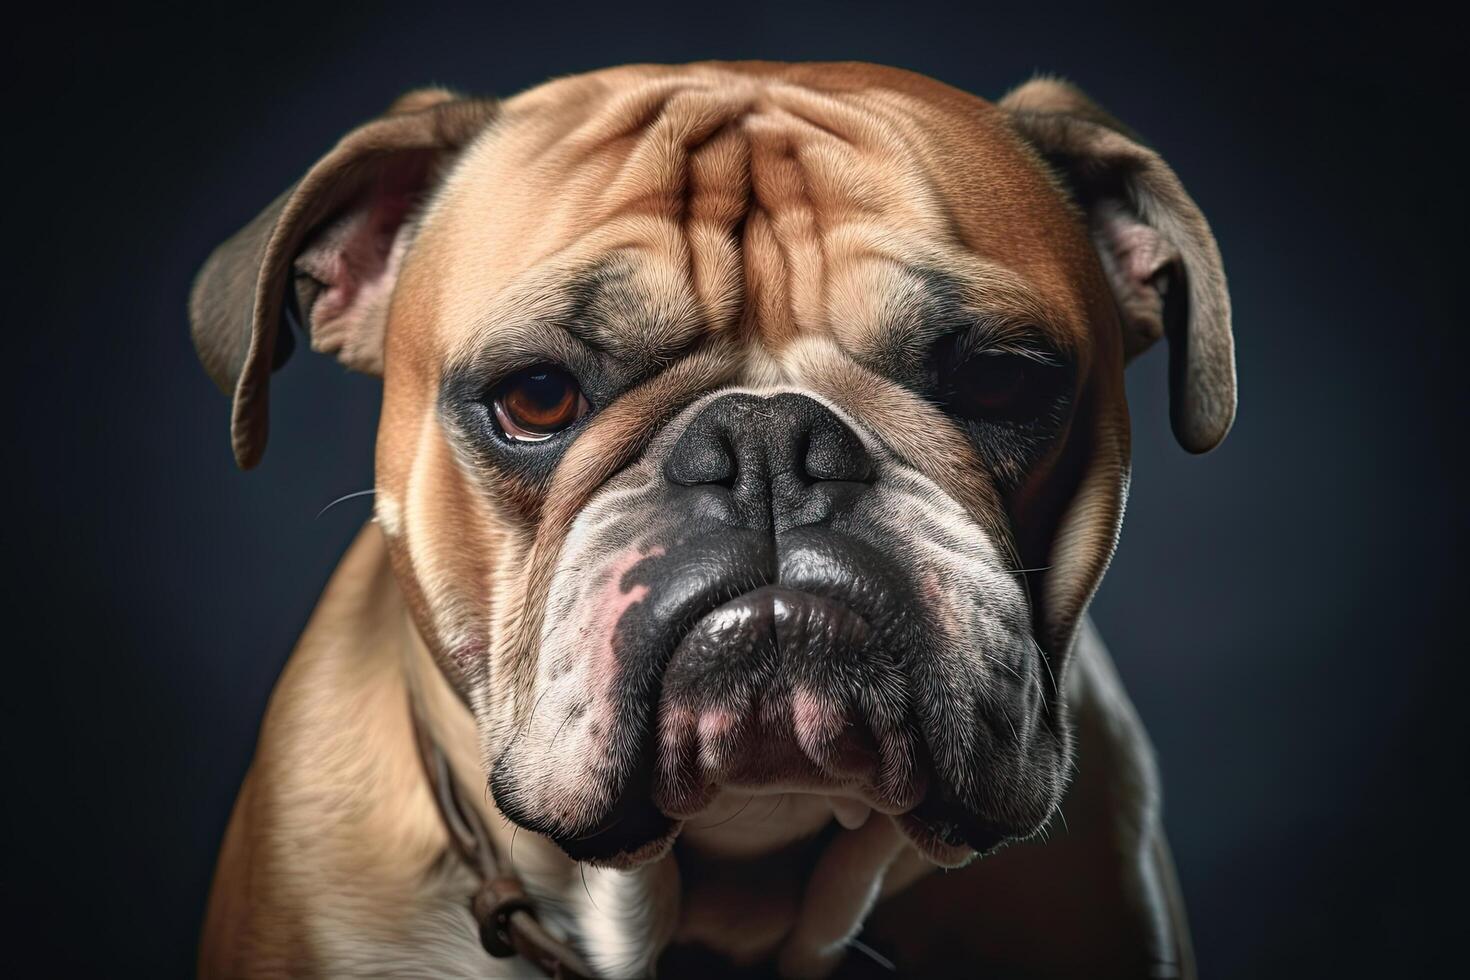 Portrait of a dog breed English Bulldog on a dark background, Funny dog disgusted face close up, photo